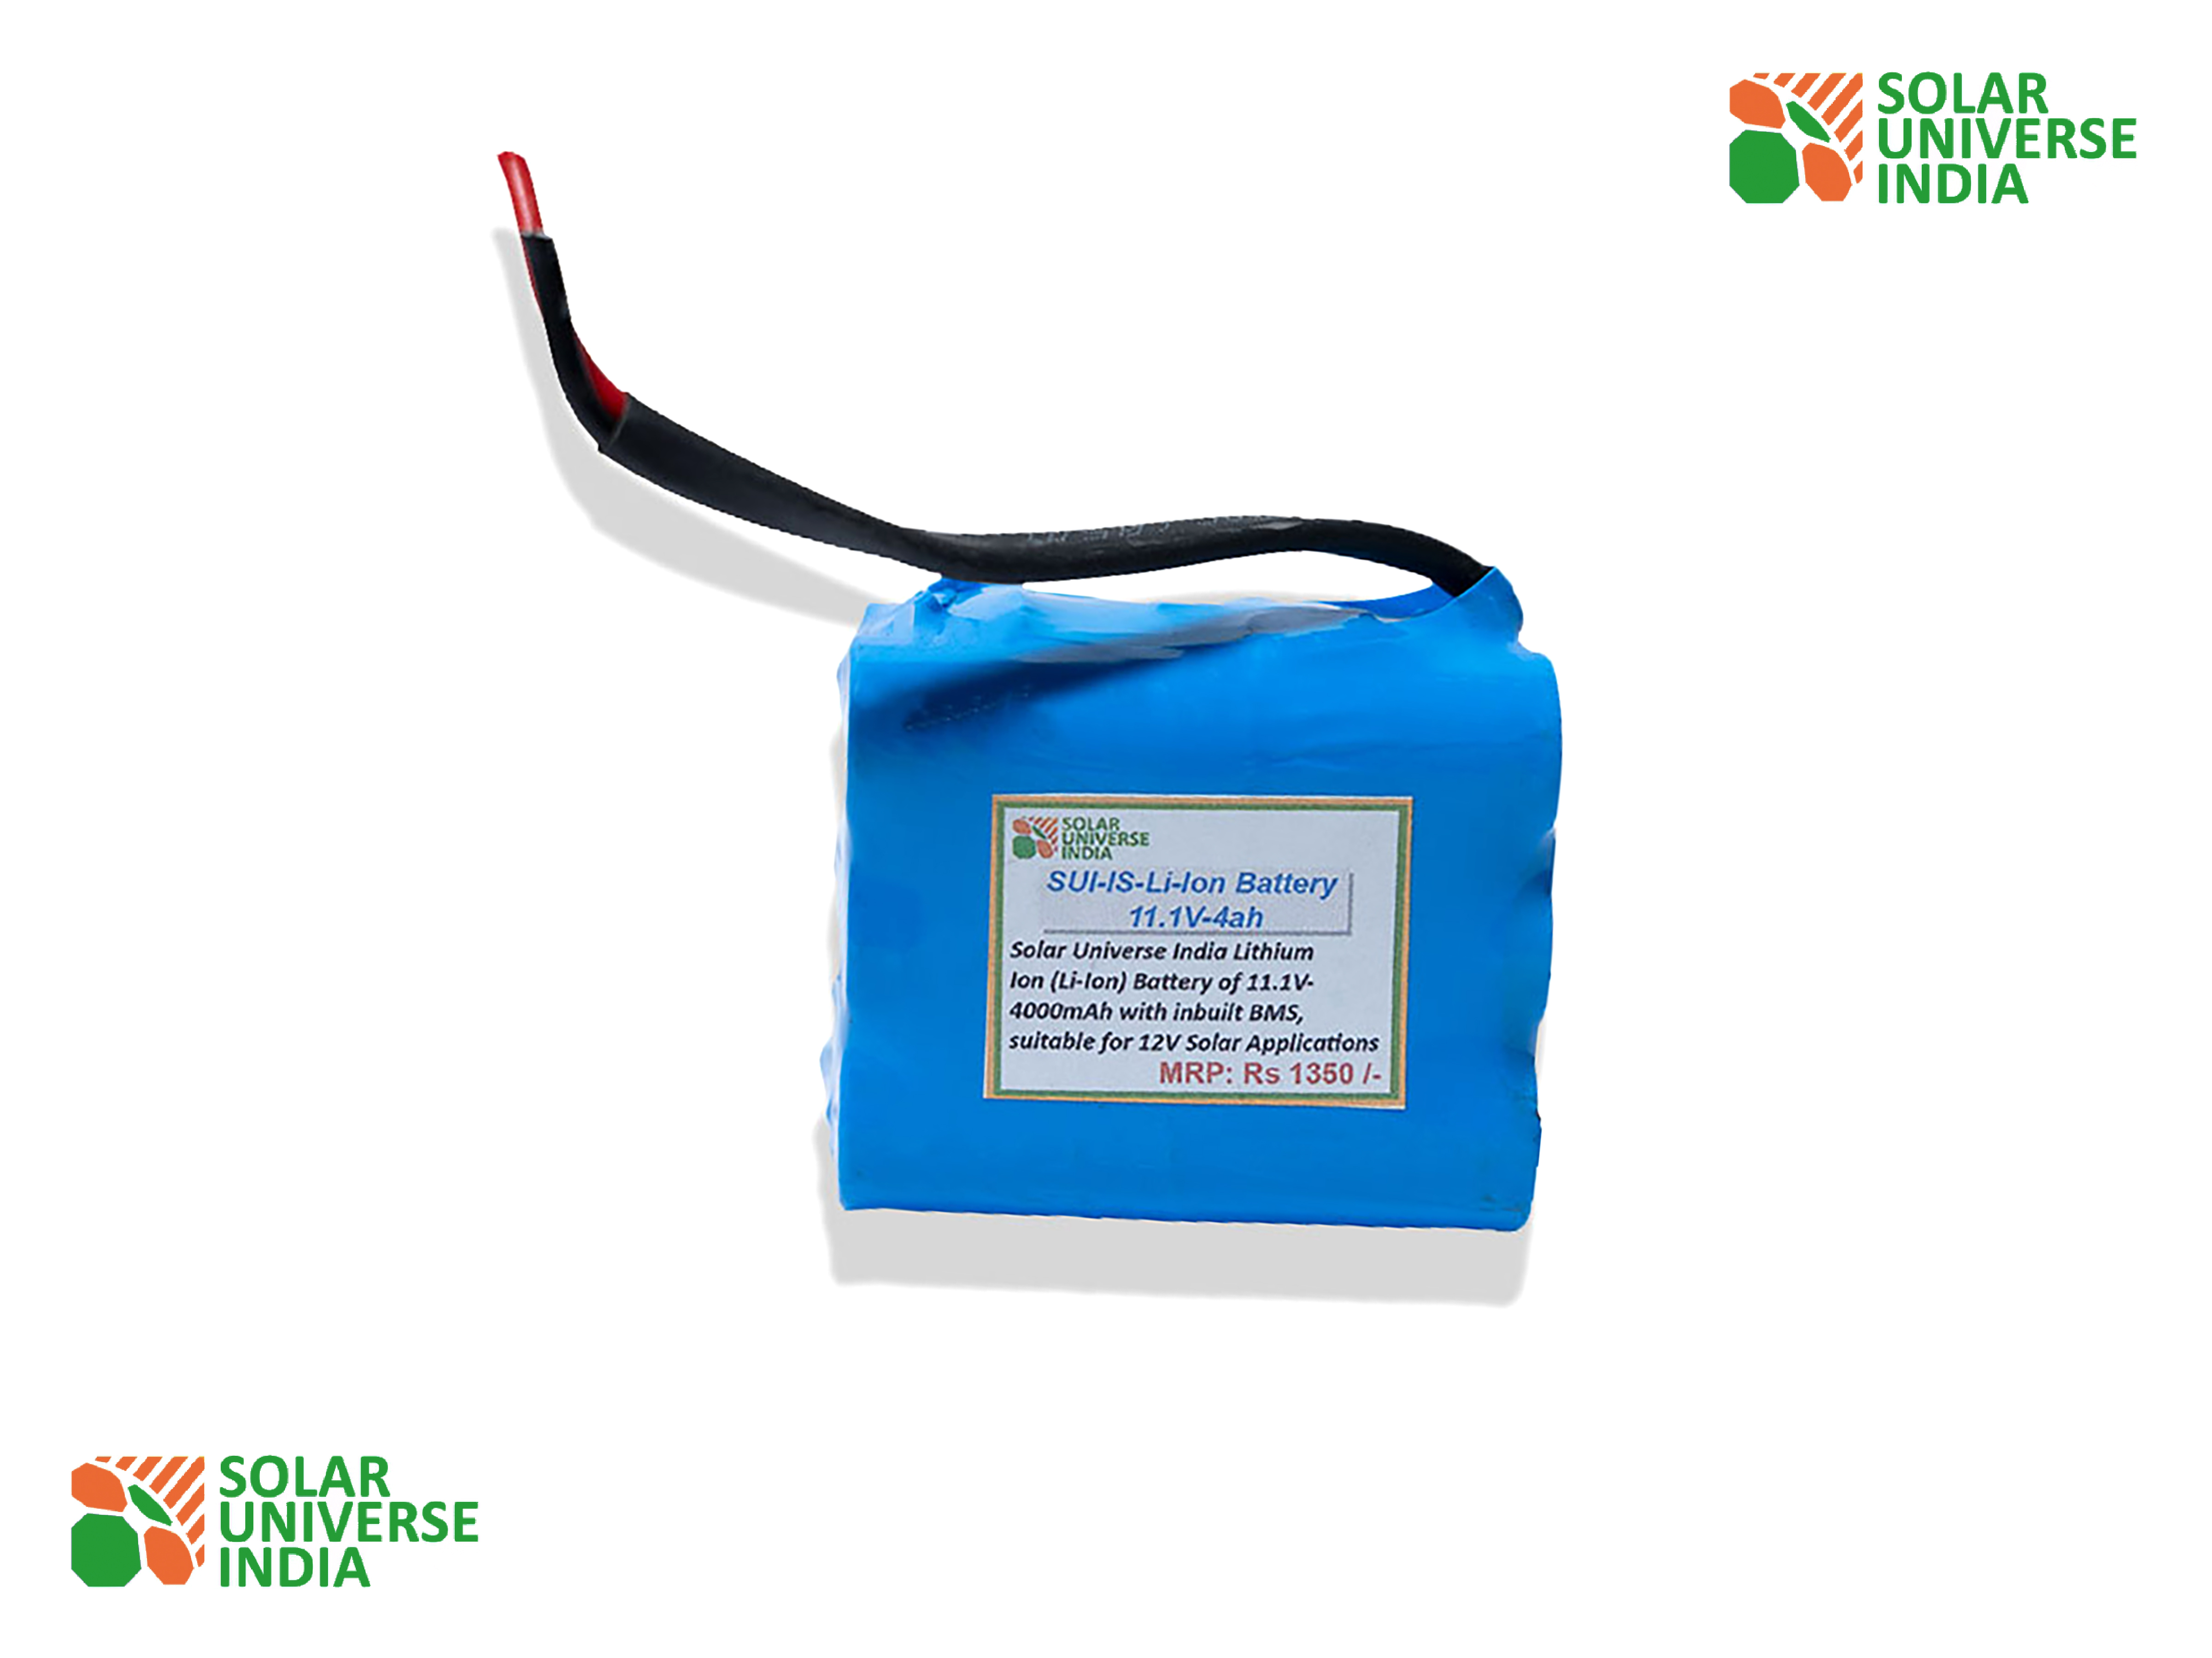 Lithium Ion Battery of 11.1V-4000mAh with inbuilt BMS, suitable